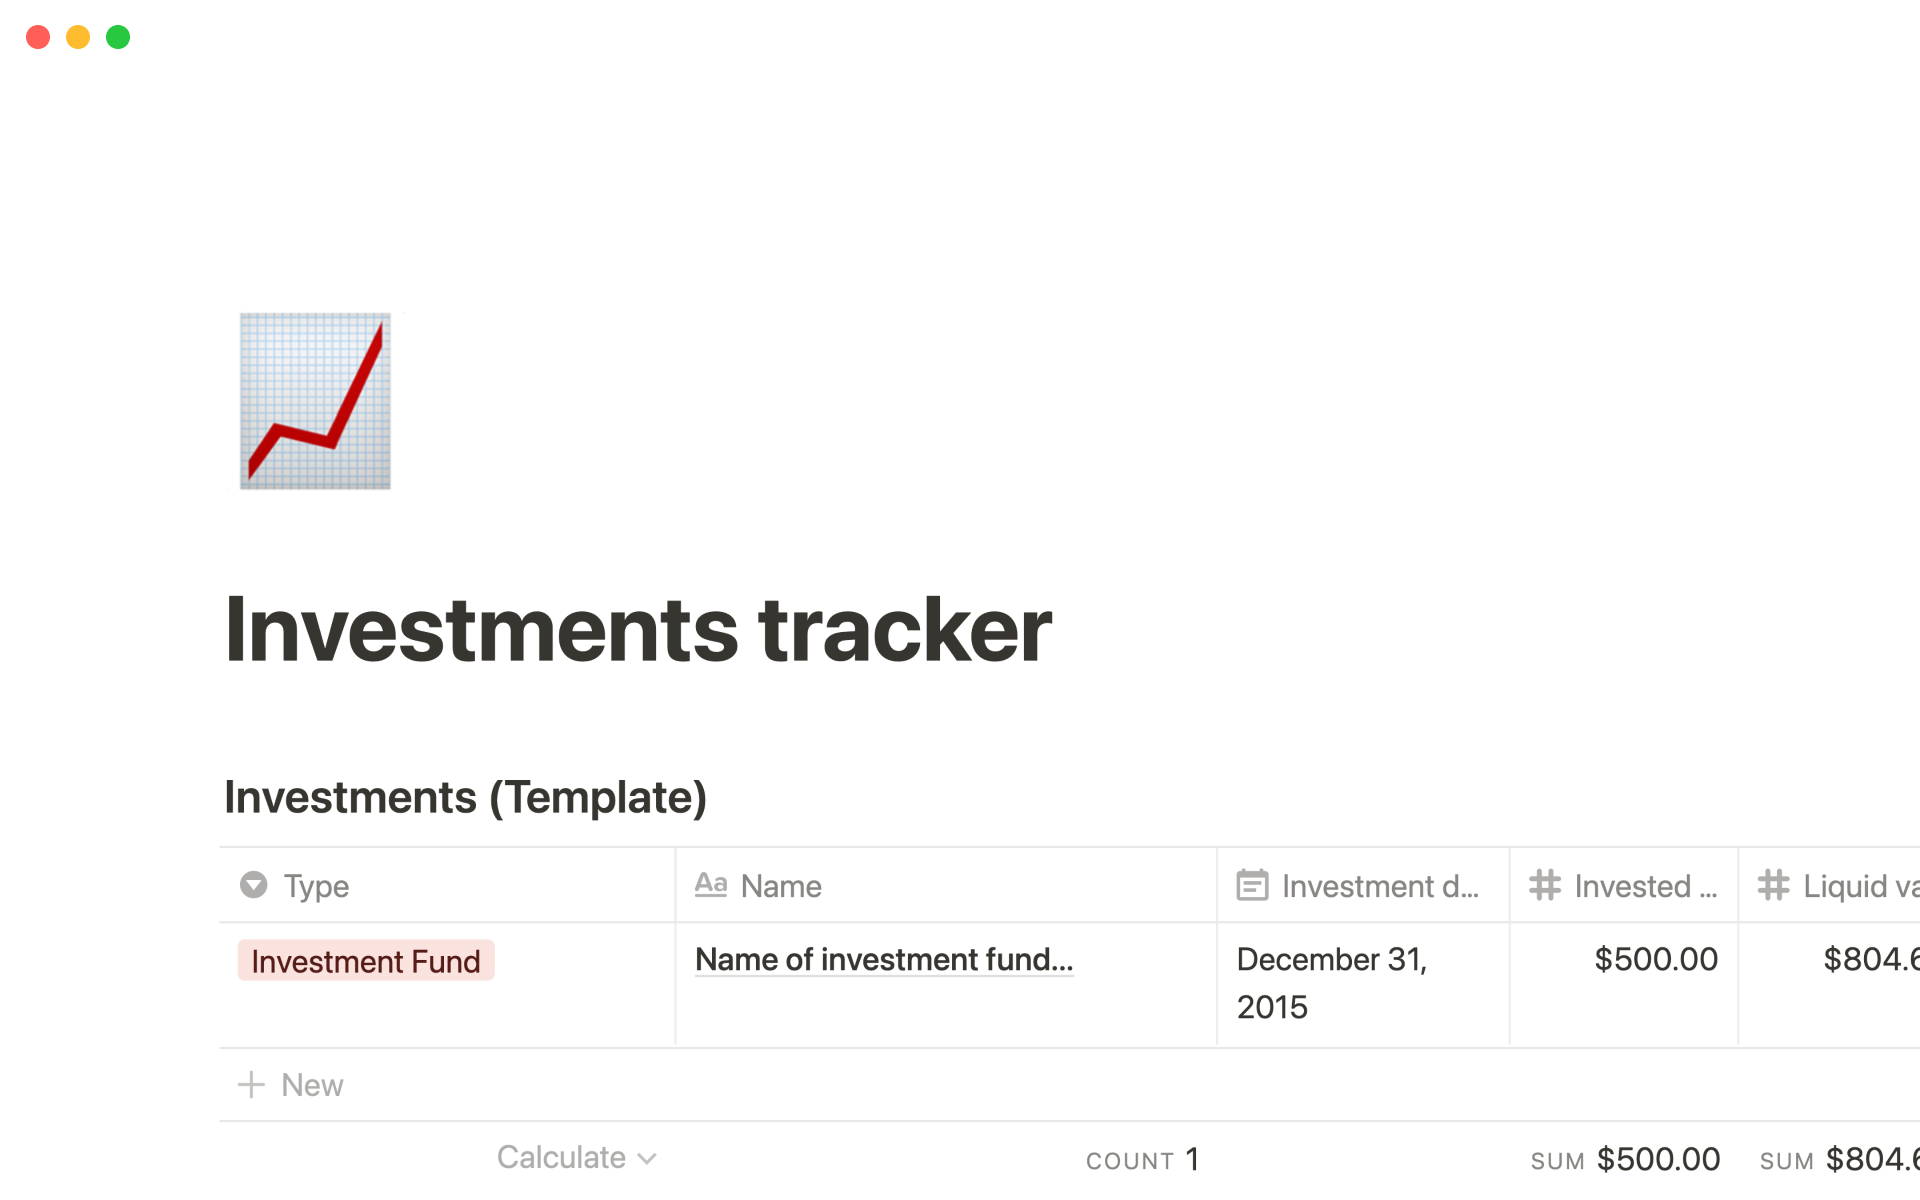 The desktop image for the Investments tracker template